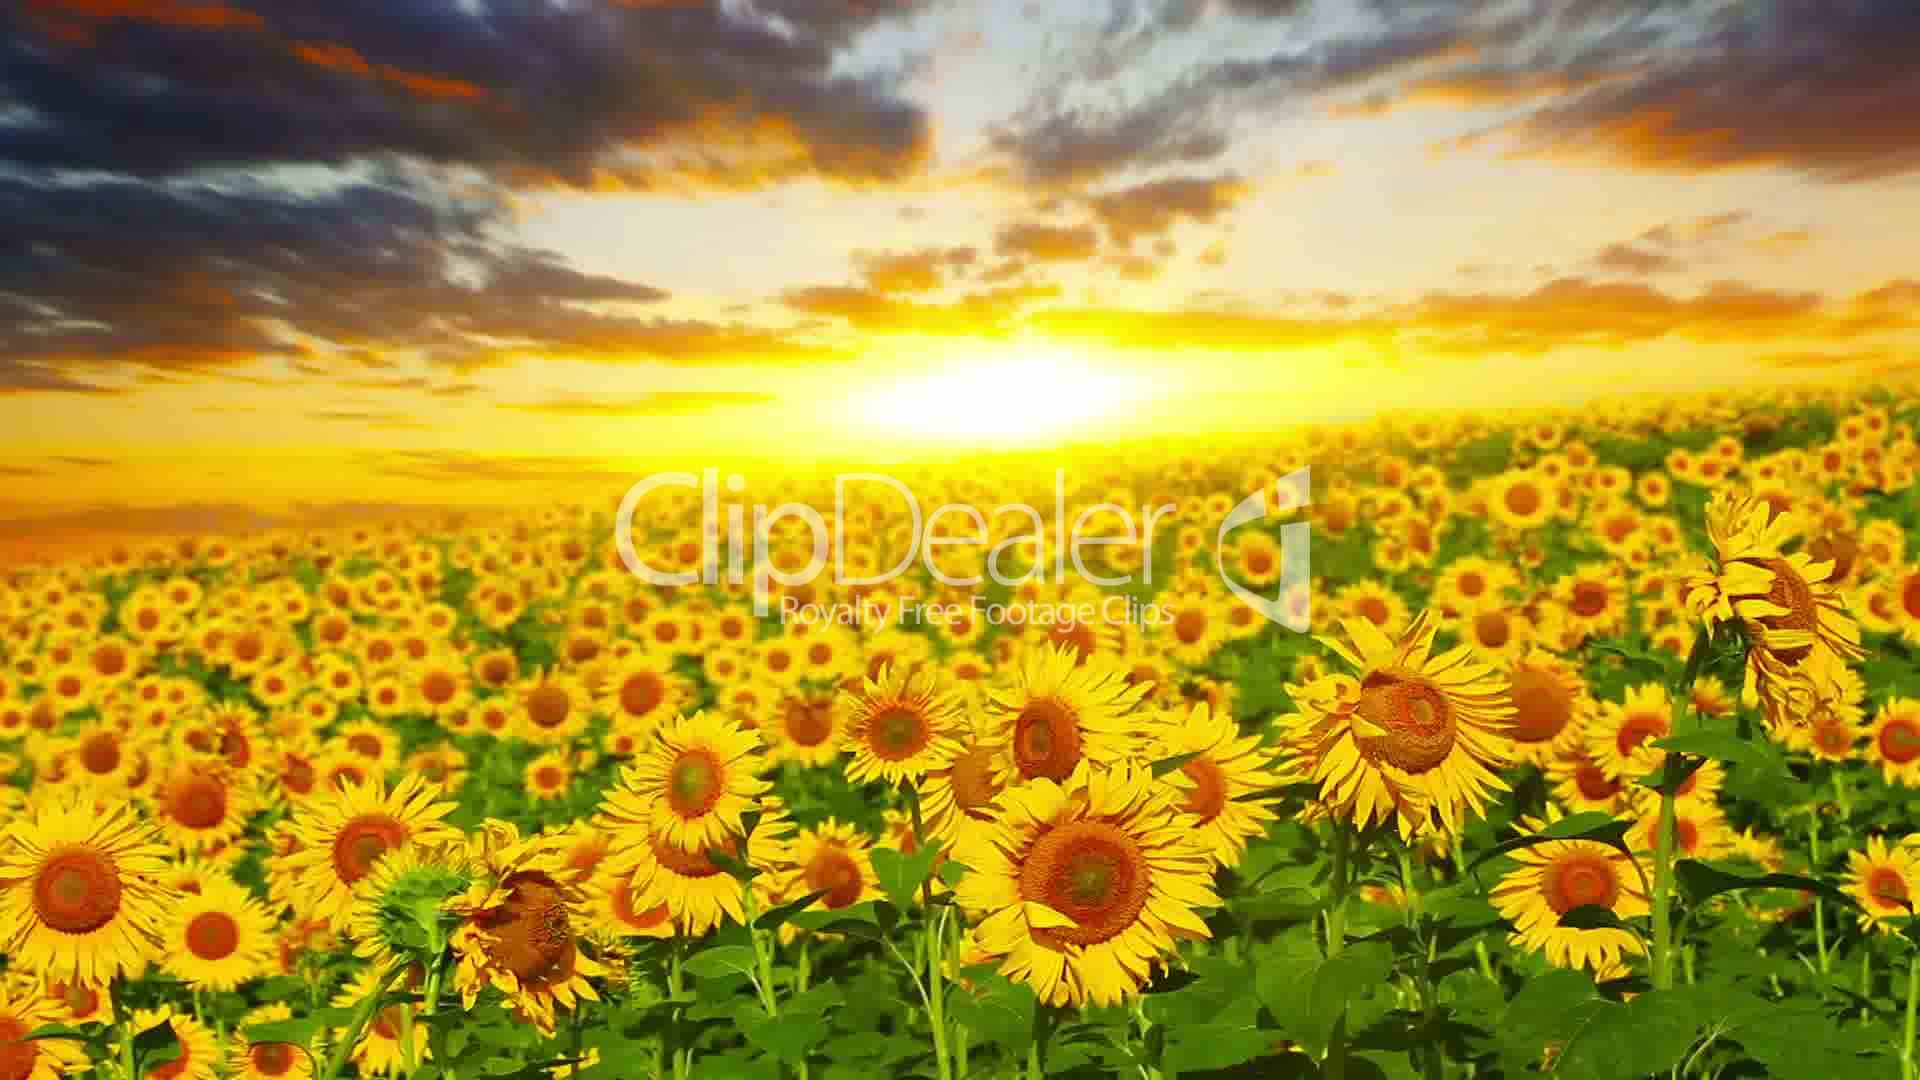 Flowering Sunflowers: Royalty Free Video And Stock Footage